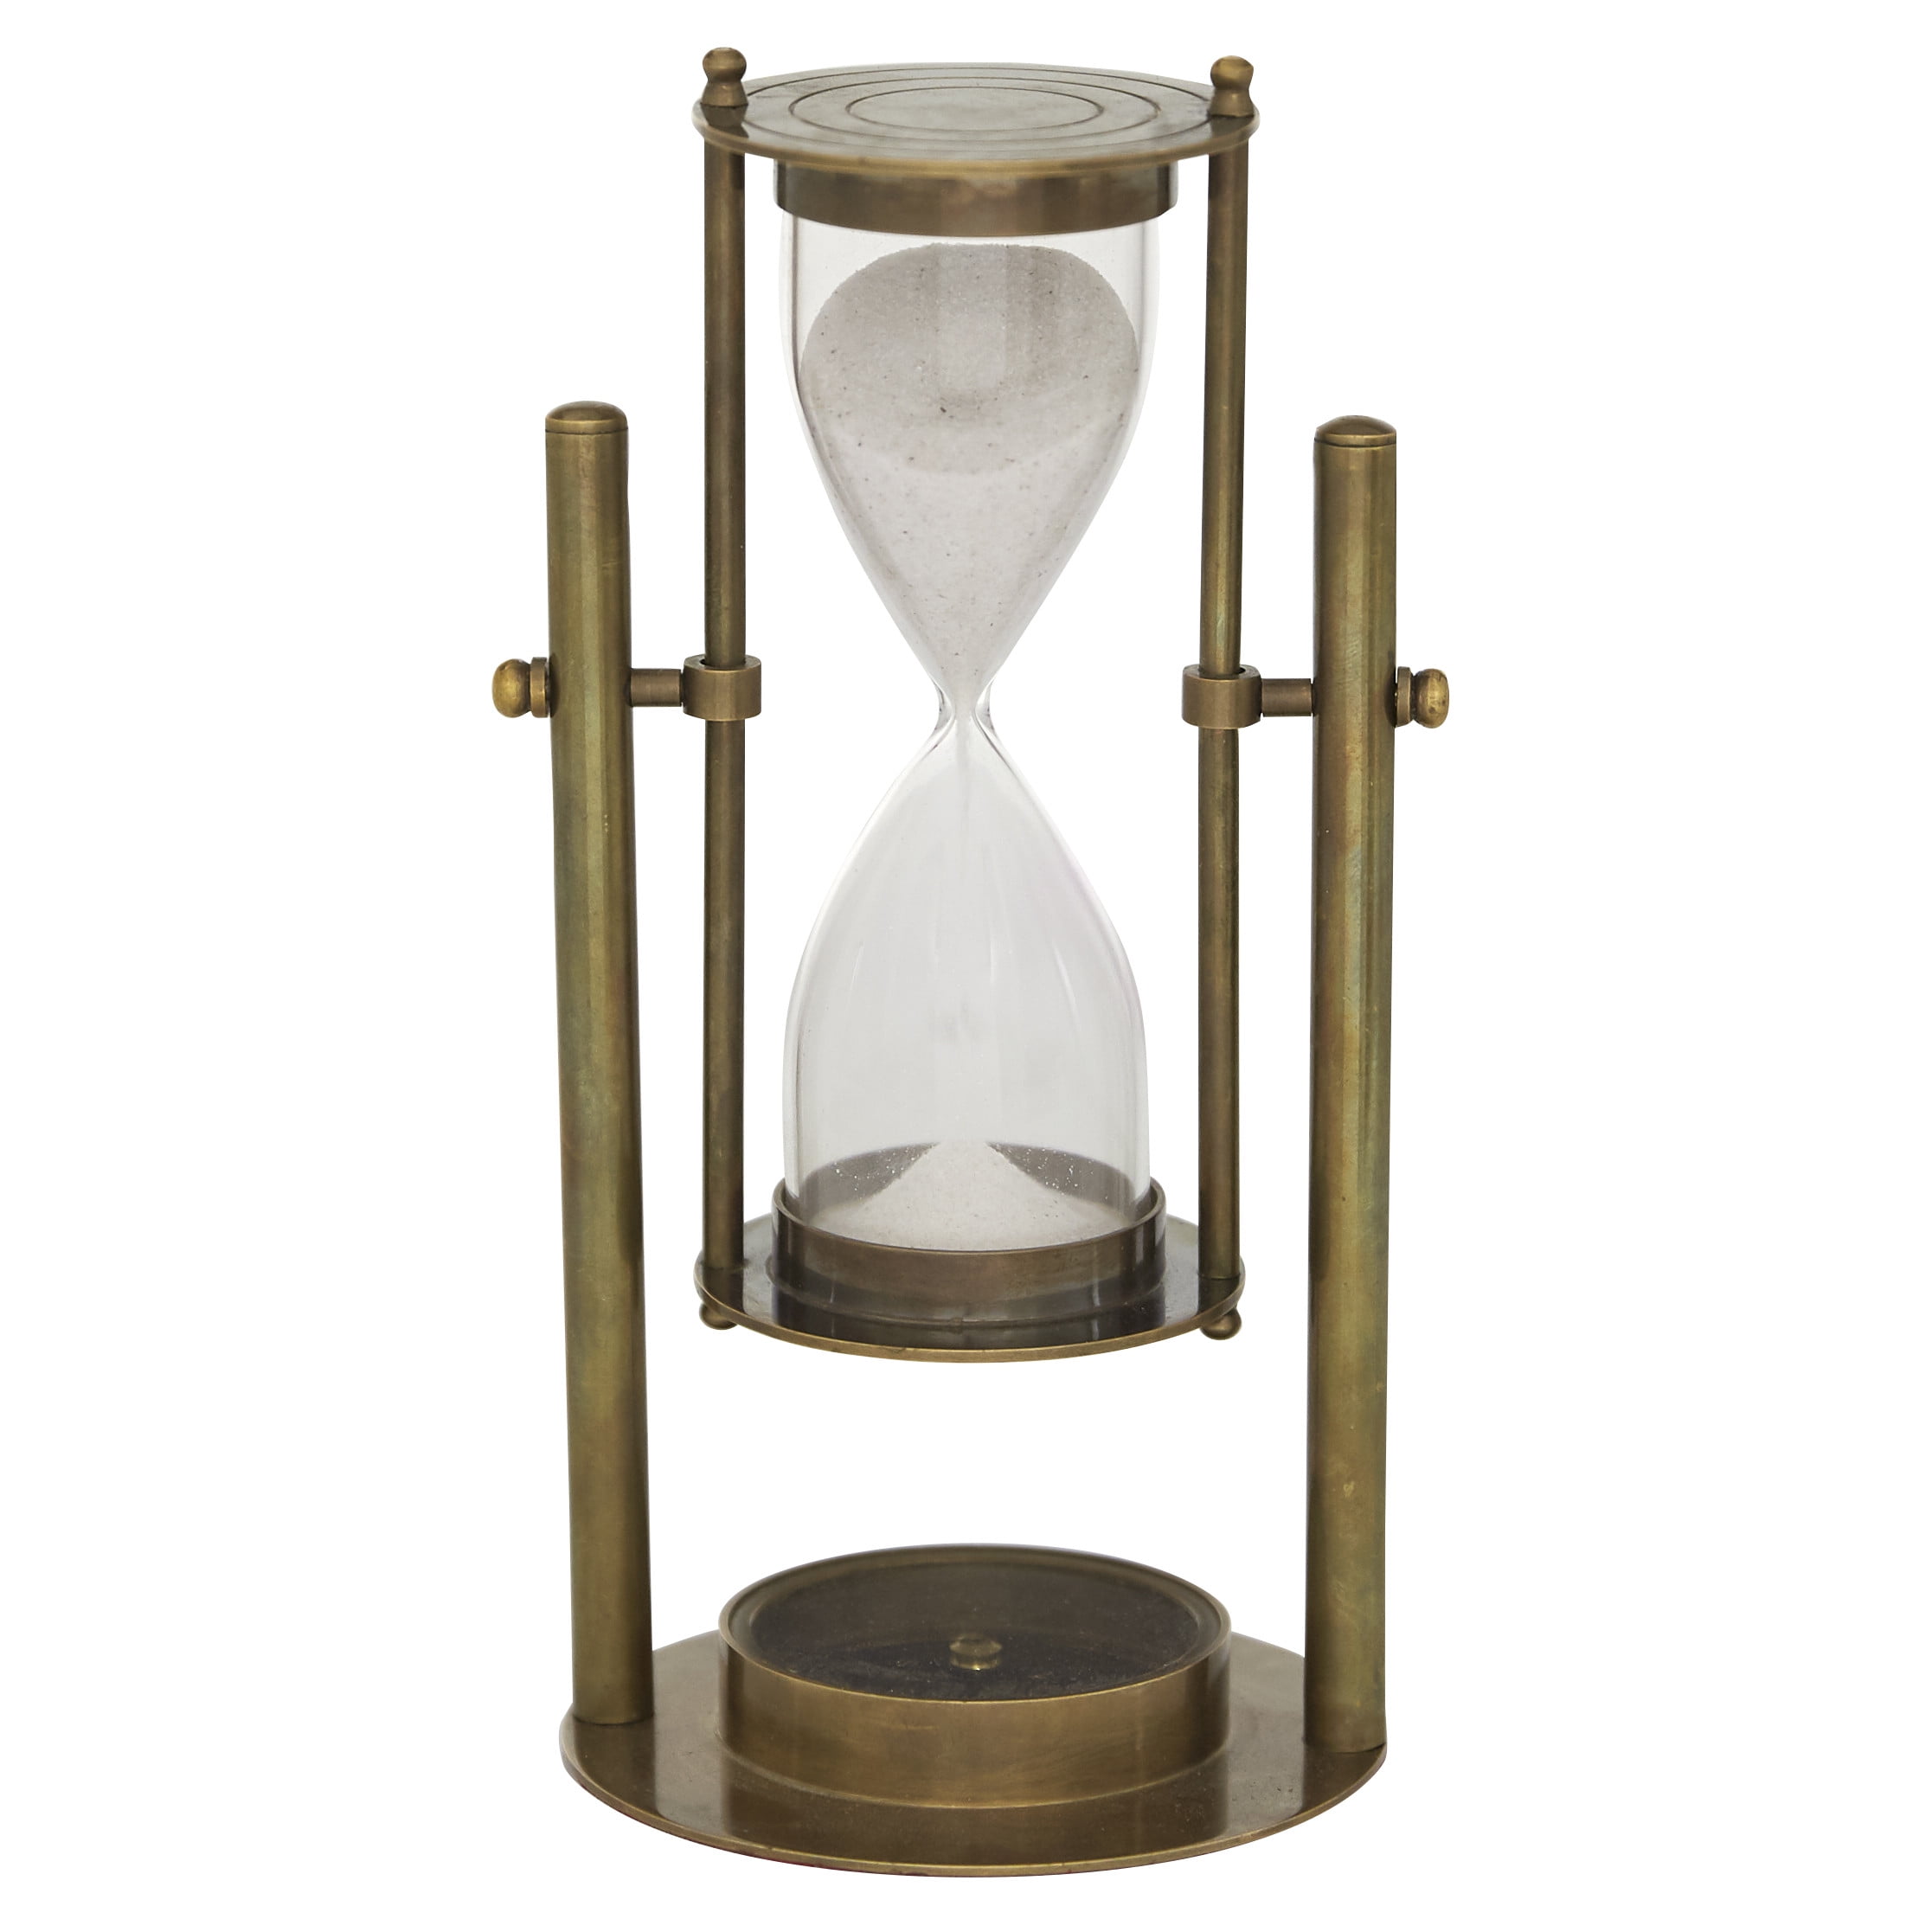 SOLID BRASS SANDTIMER WITH COMPASS VINTAGE RETRO STYLE 5 minute Sand timer 